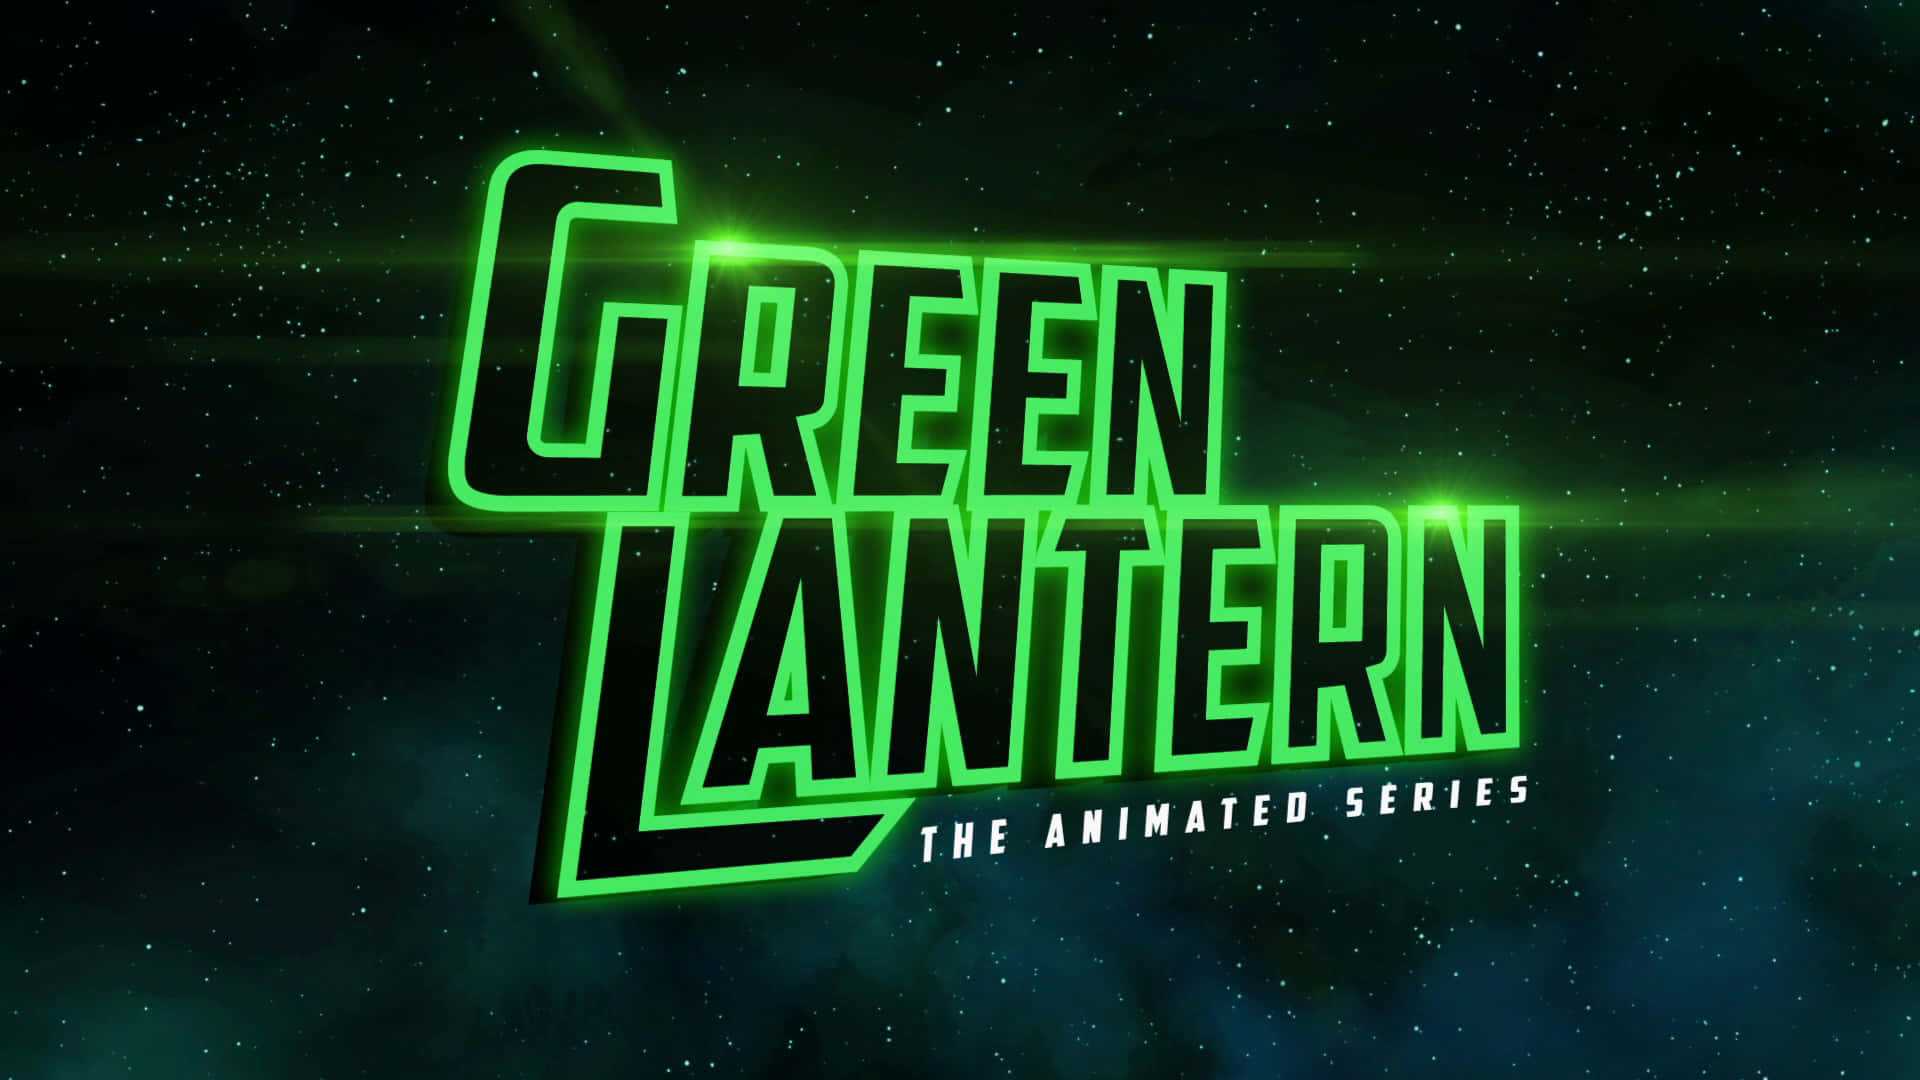 Green Lantern The Animated Series Title Card Wallpaper